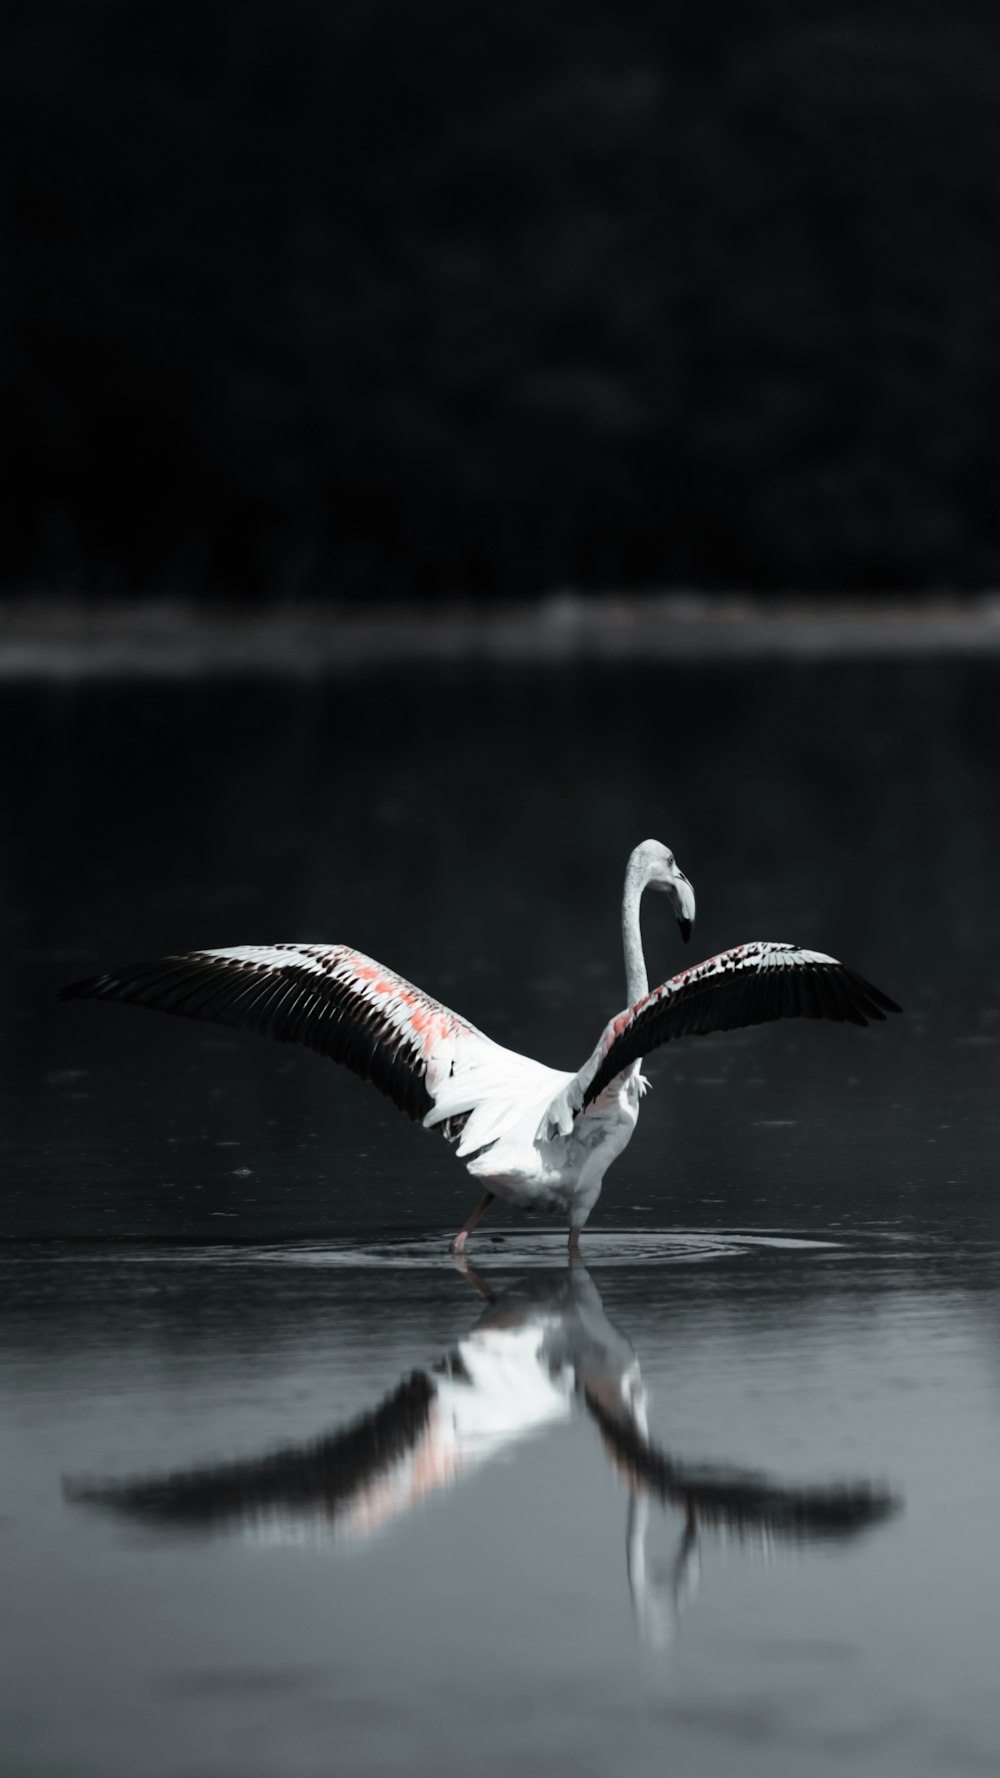 a white and black bird is flying over the water